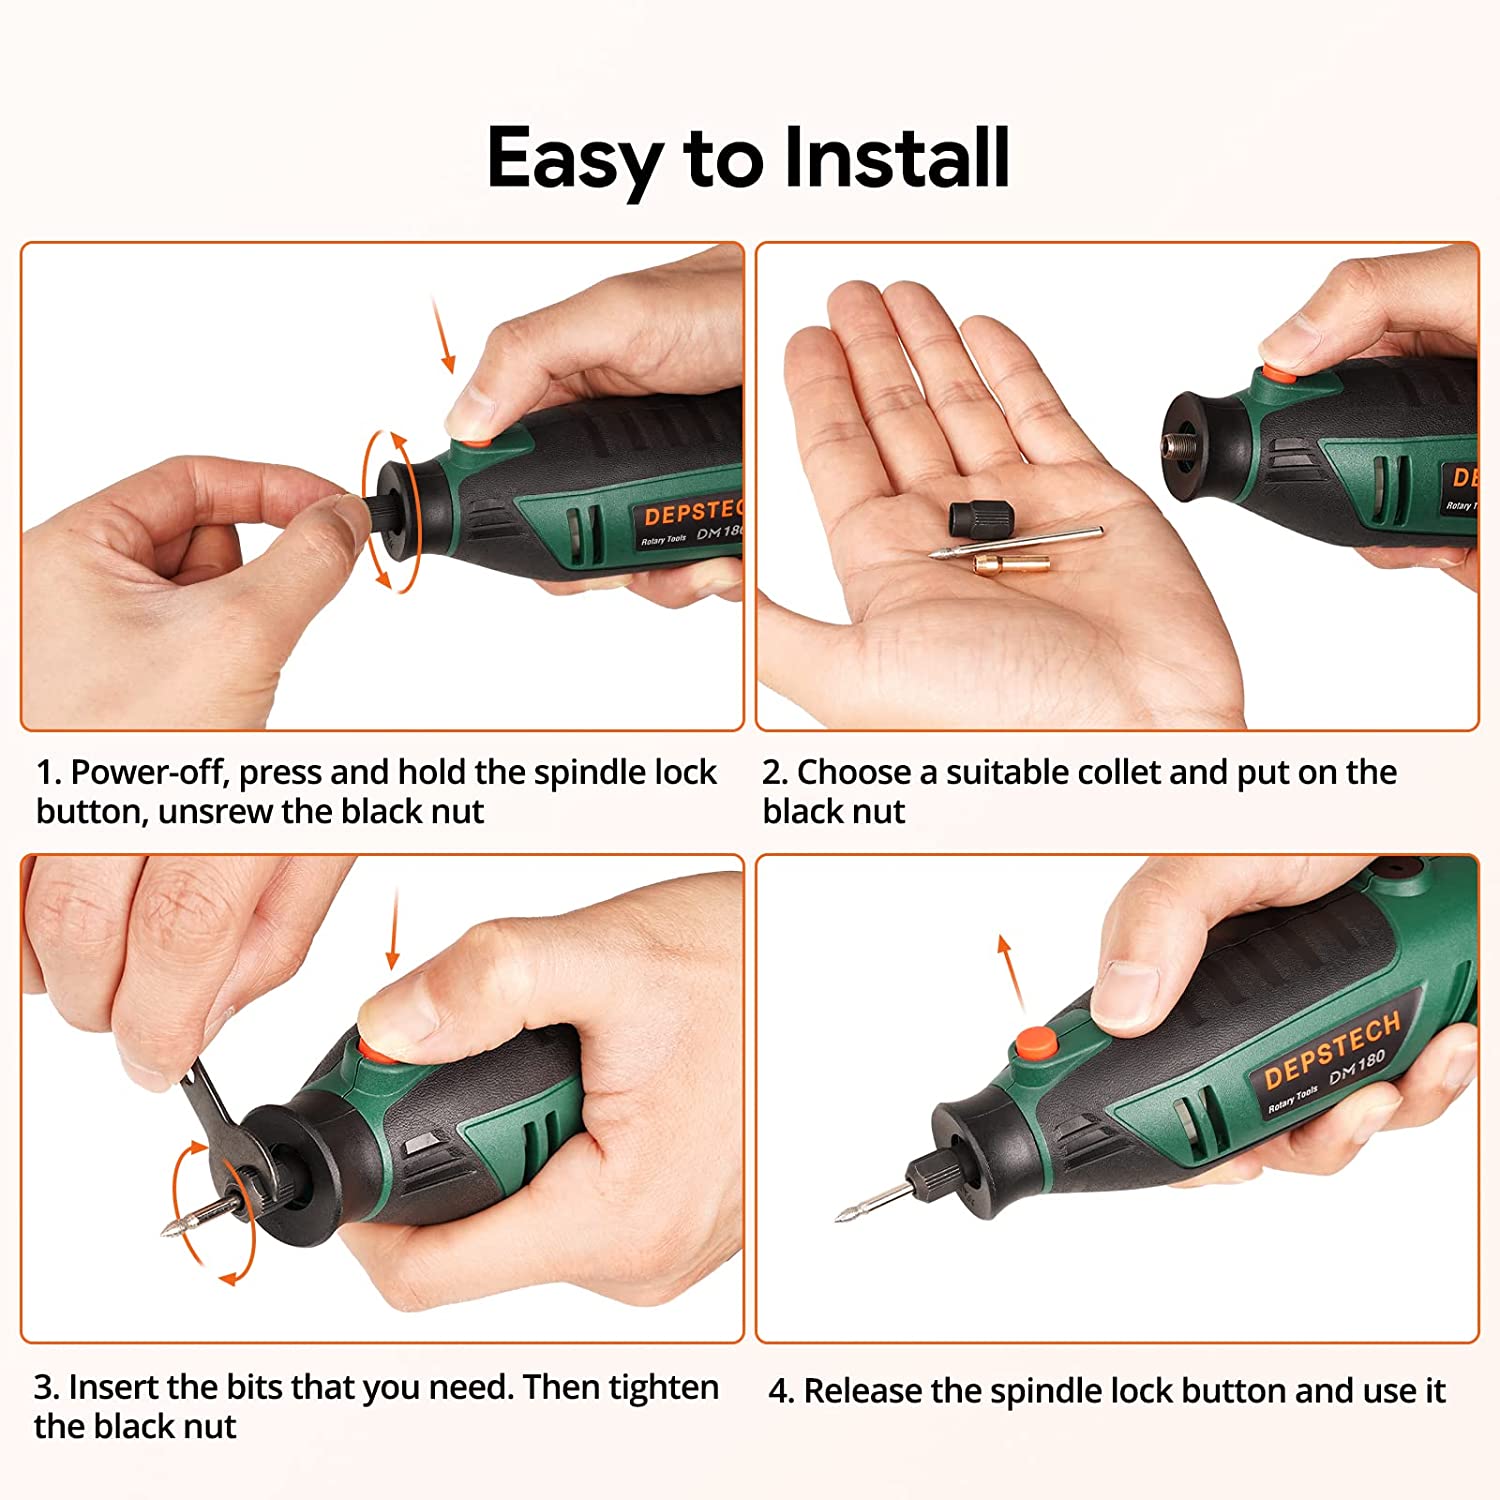 DEPSTECH 180W Corded Rotary Tool, DIY Wood Carving Tool Kit